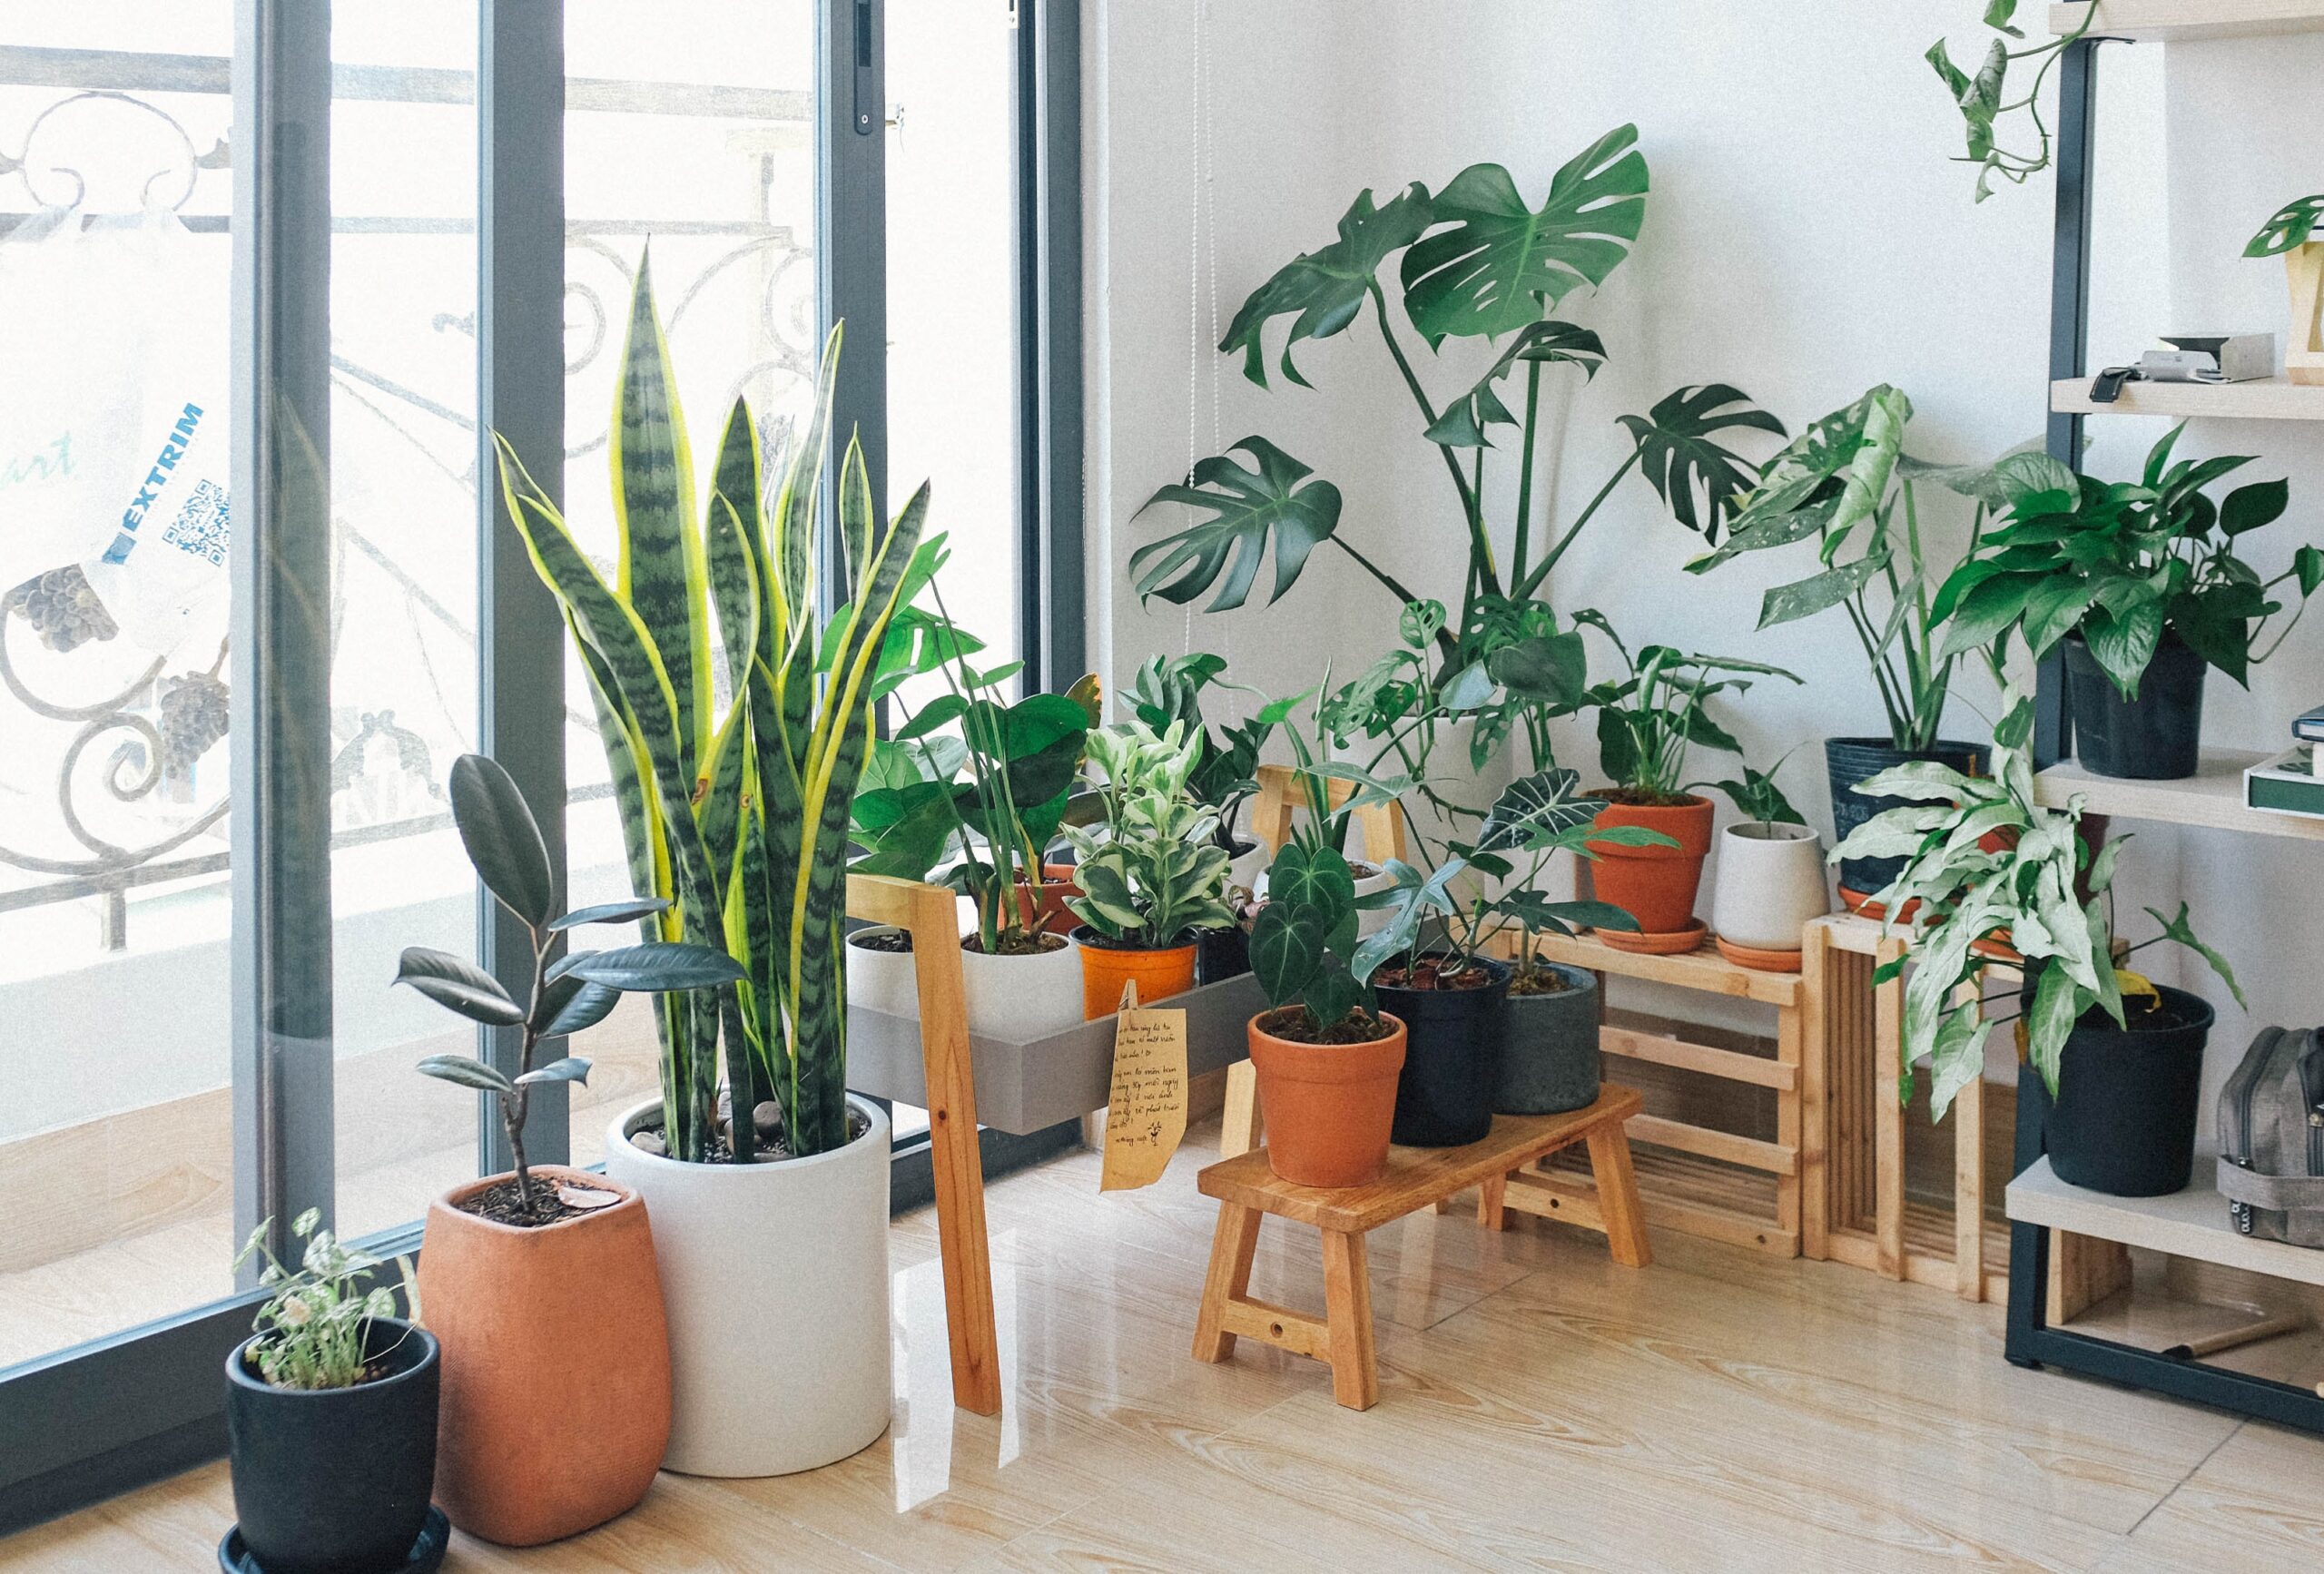 A variety of house plants sit in front of a window letting in bright light